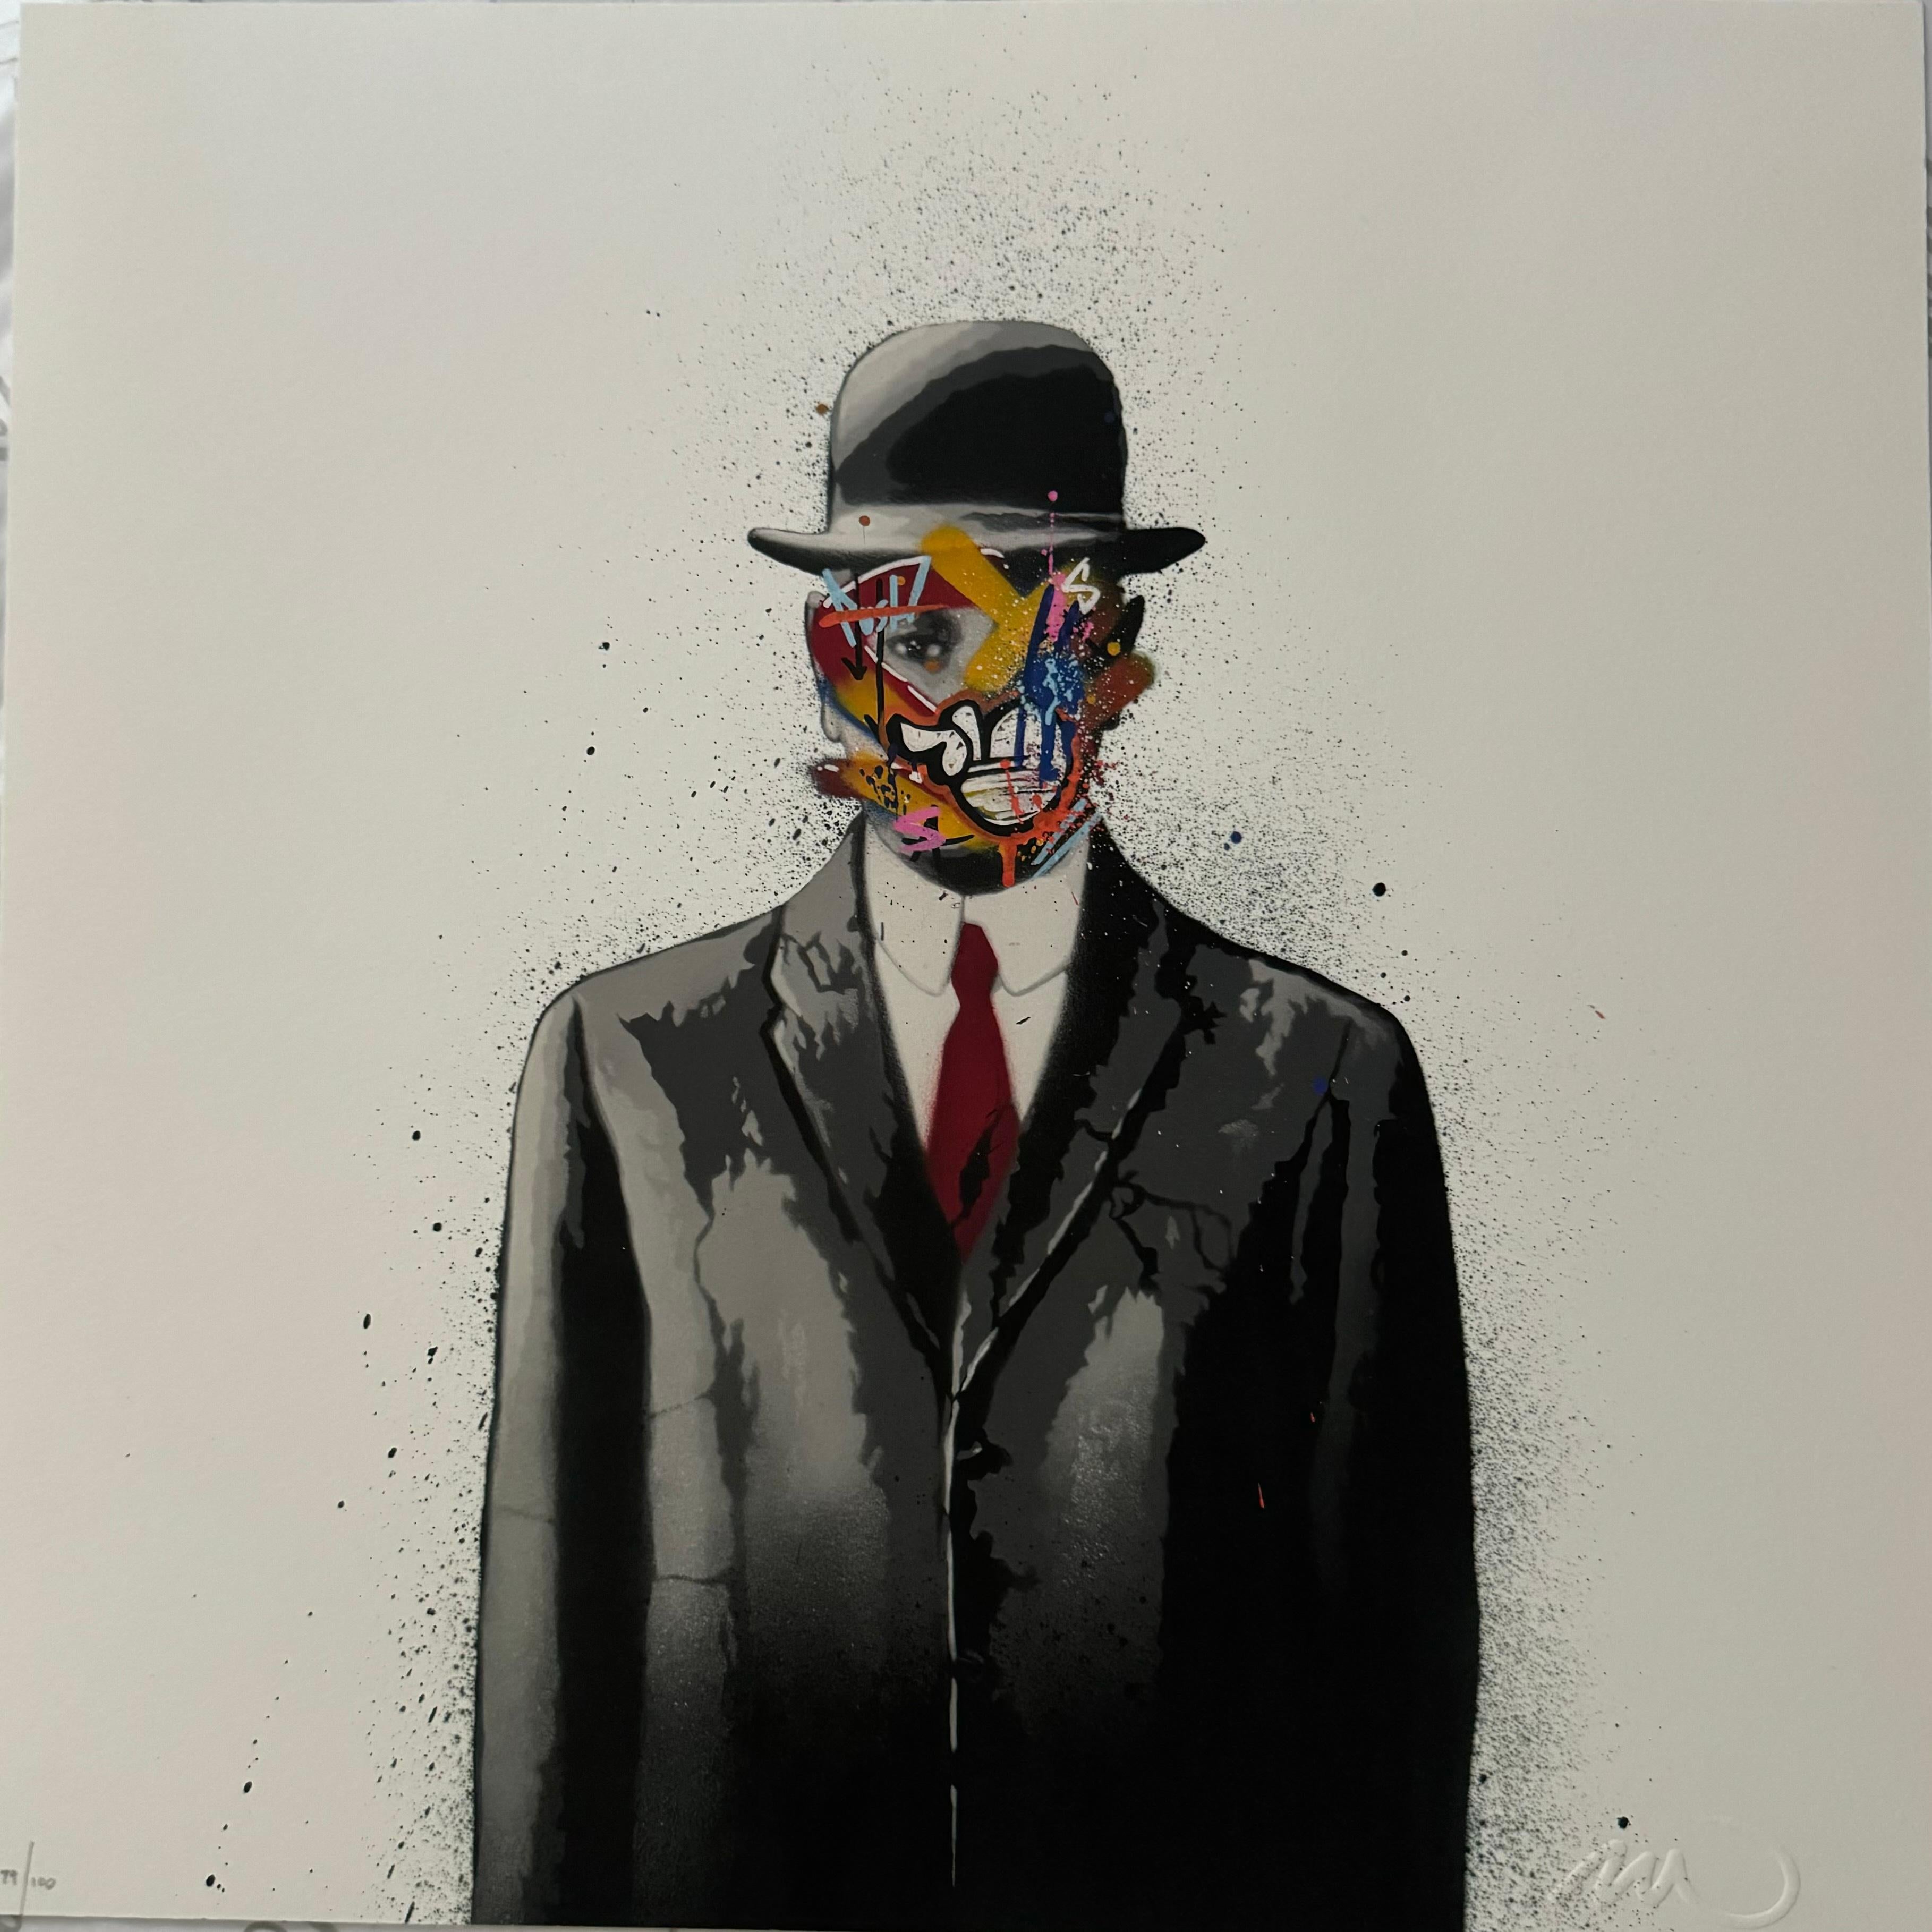 For sale is a stunning Martin Whatson "Son of Man" mini print,  with a gorgeous peach square background. Measuring at 12 inches by 12 inches and embossed with his signature, this screenprint is a true work of art that will make a beautiful addition